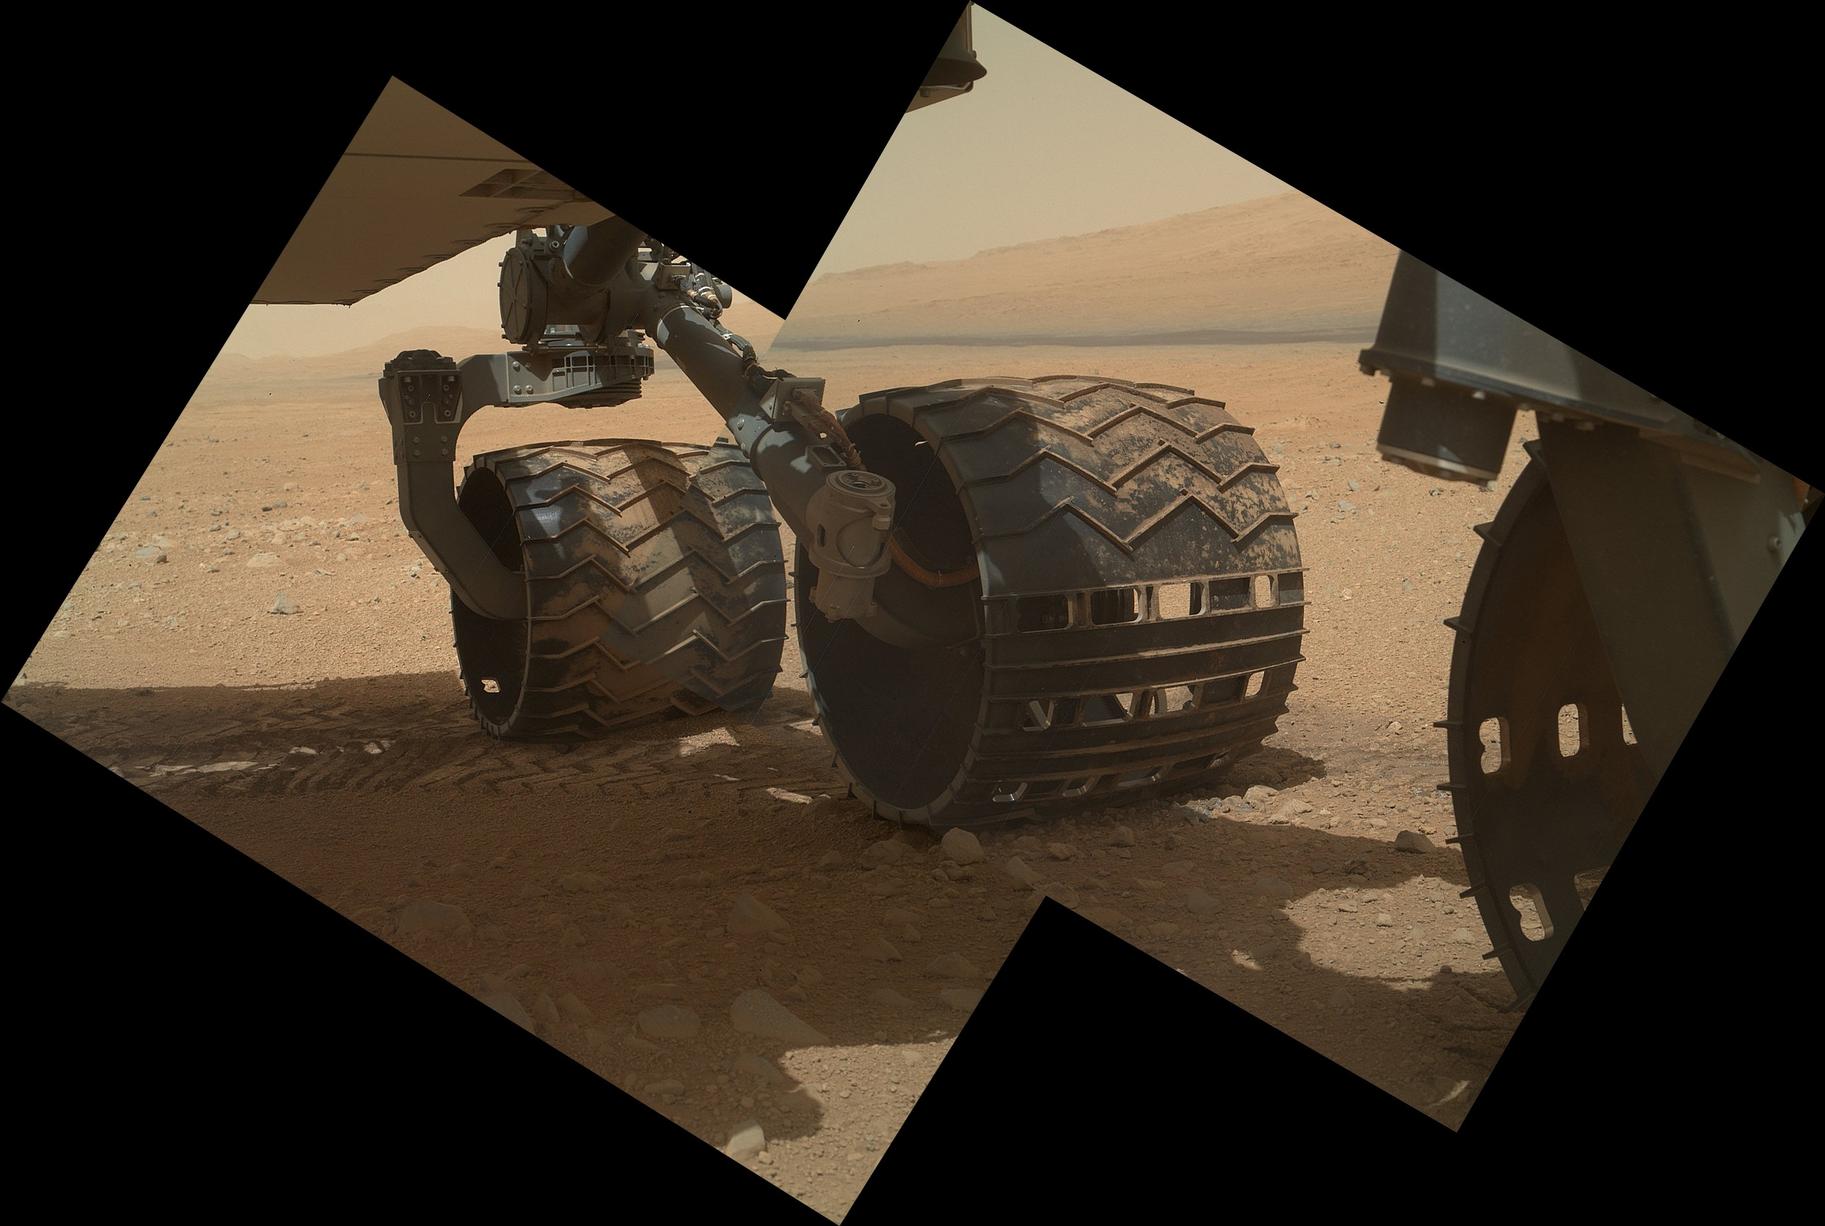 This view of the three left wheels of NASA's Mars rover Curiosity combines two images that were taken by the rover's Mars Hand Lens Imager (MAHLI) during the 34th Martian day, or sol, of Curiosity's work on Mars (Sept. 9, 2012).